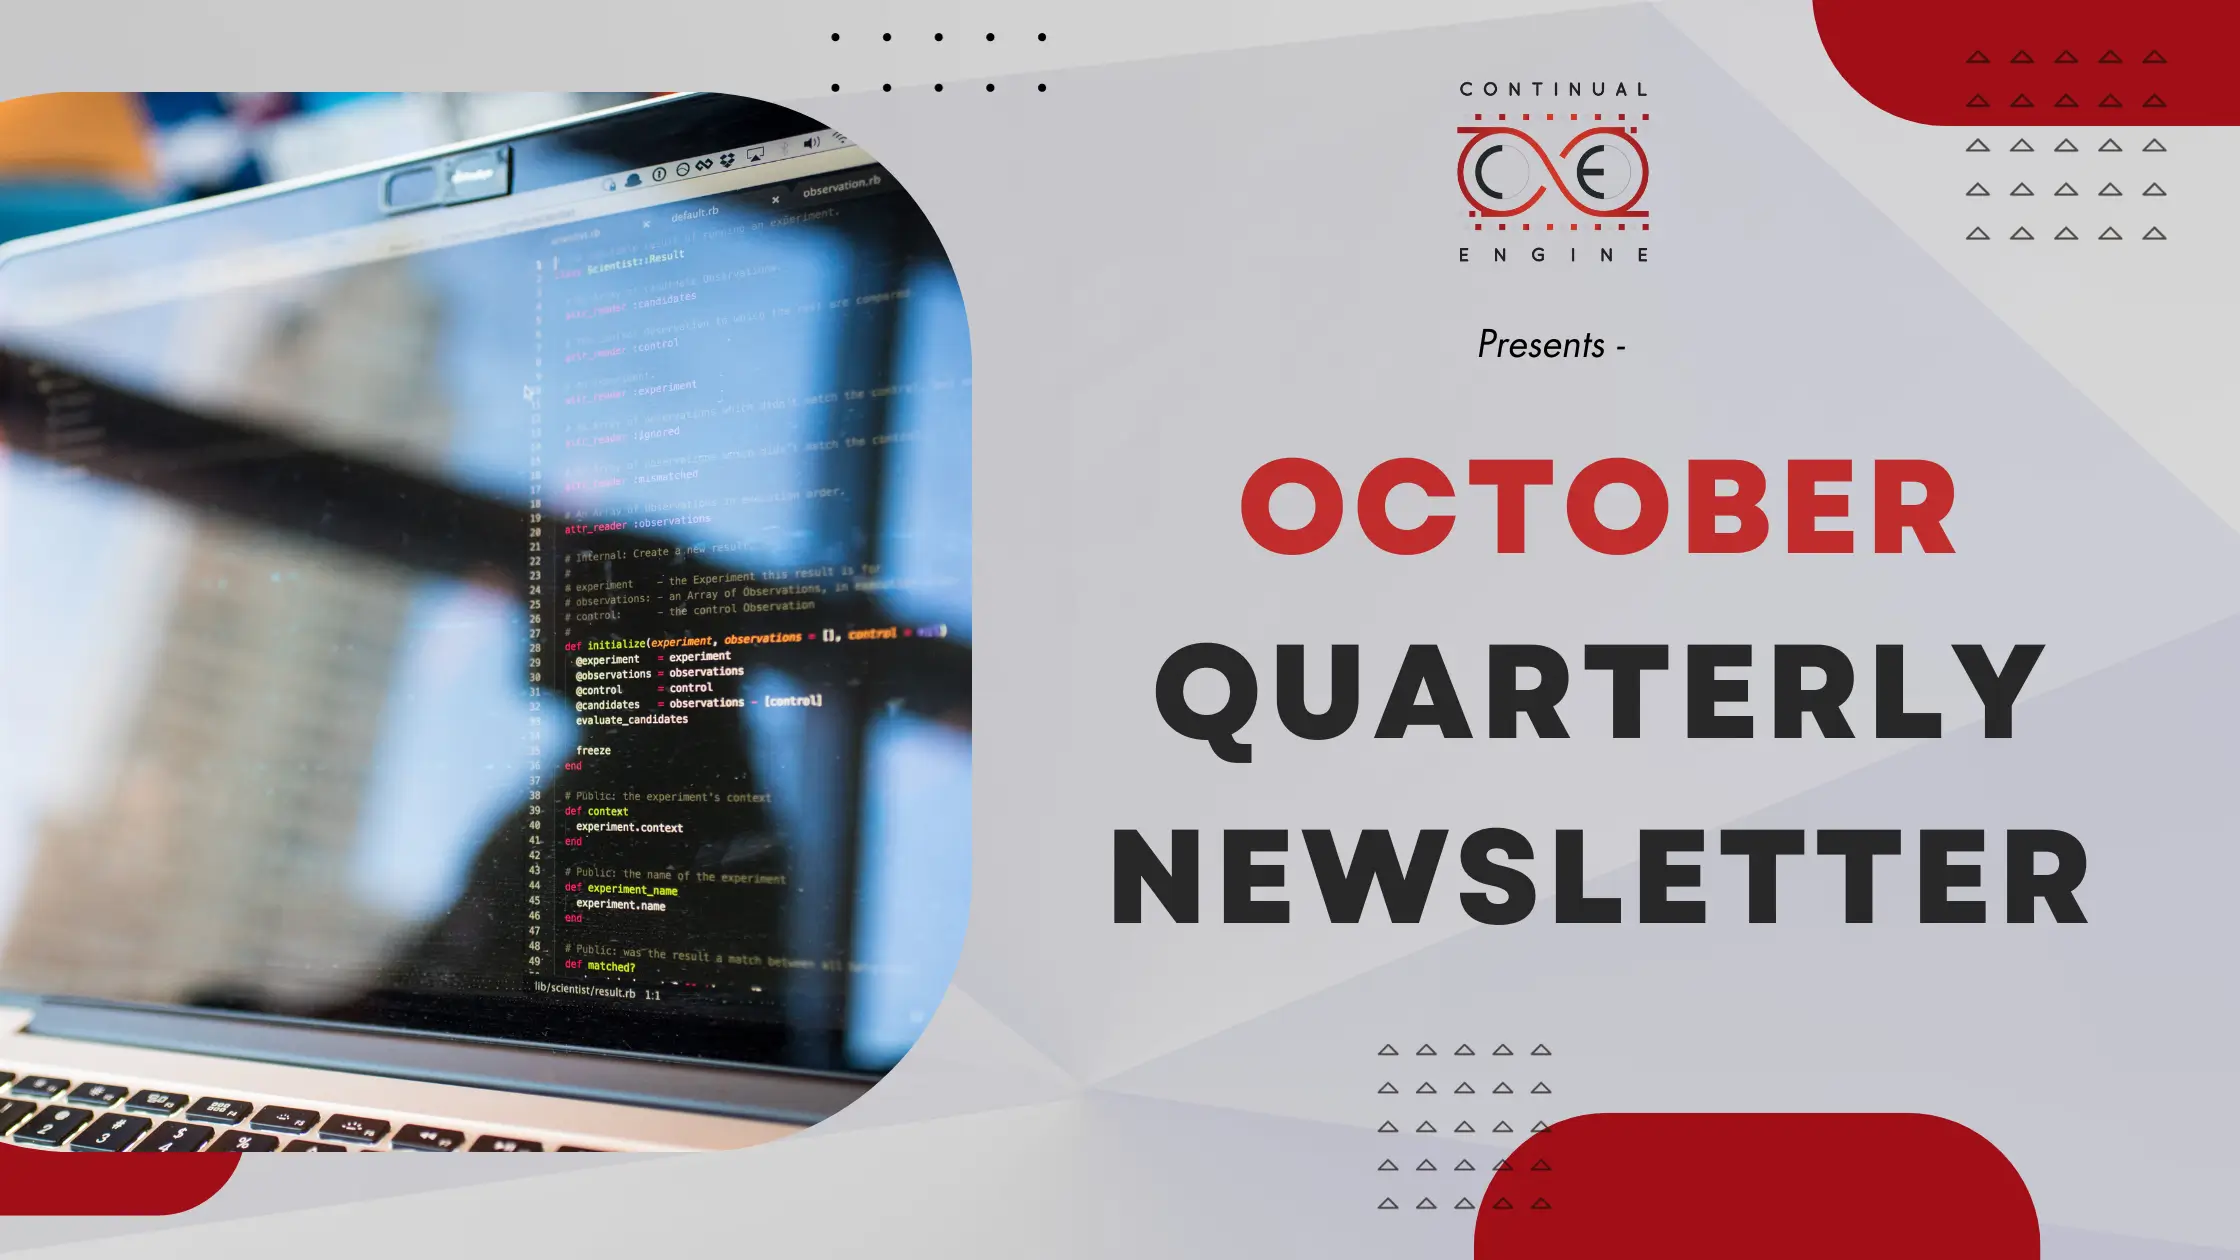 october quarterly newsletters - continual engine